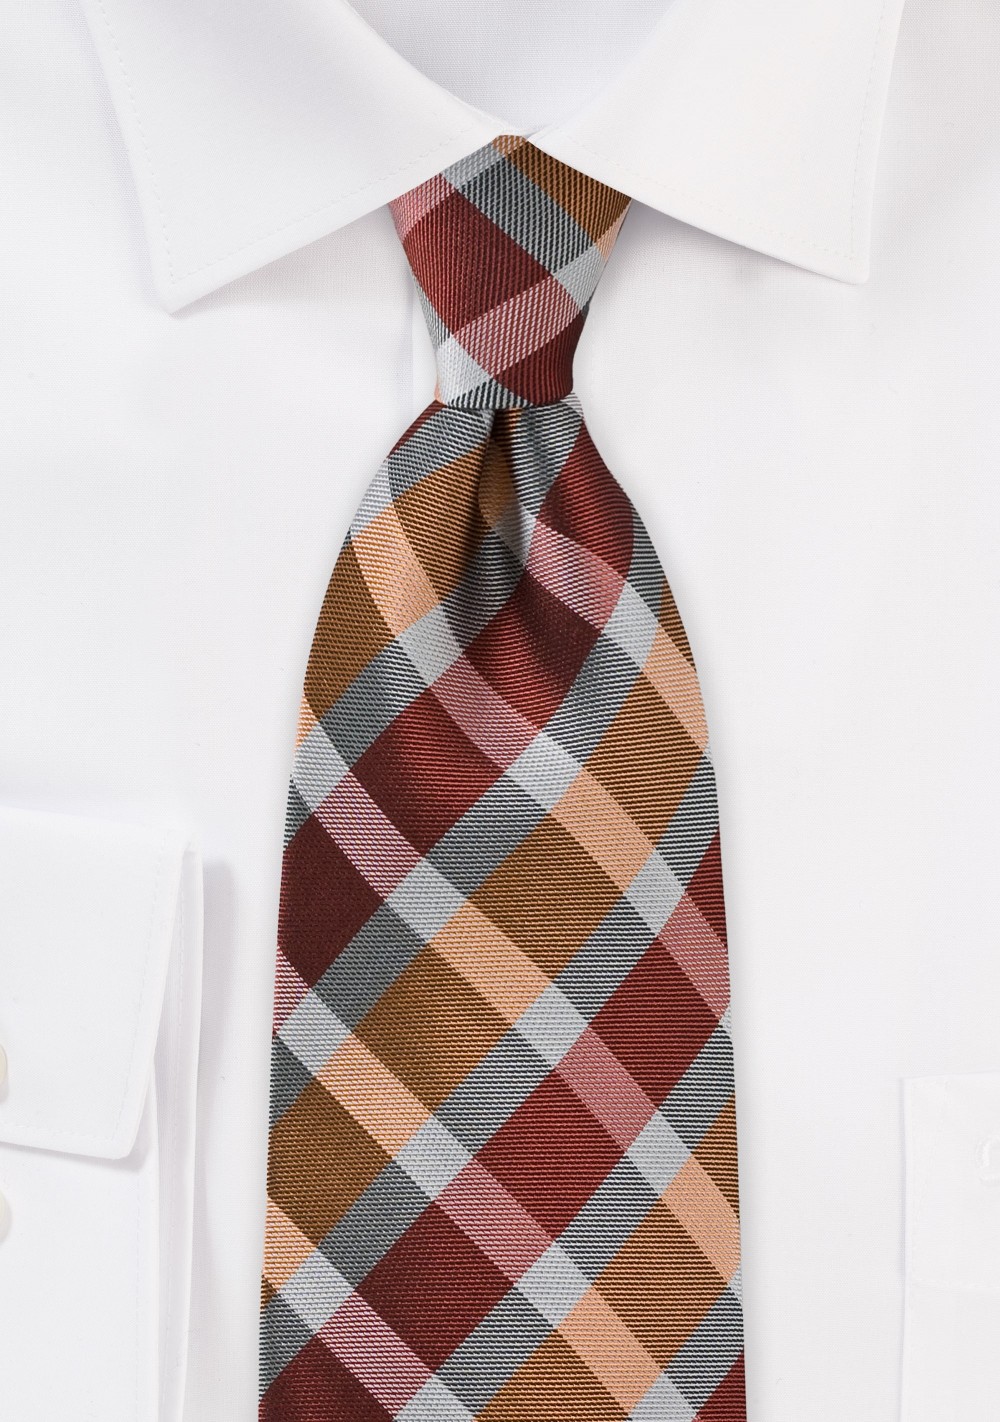 Modern Tie in Persimmon Oranges and Greys